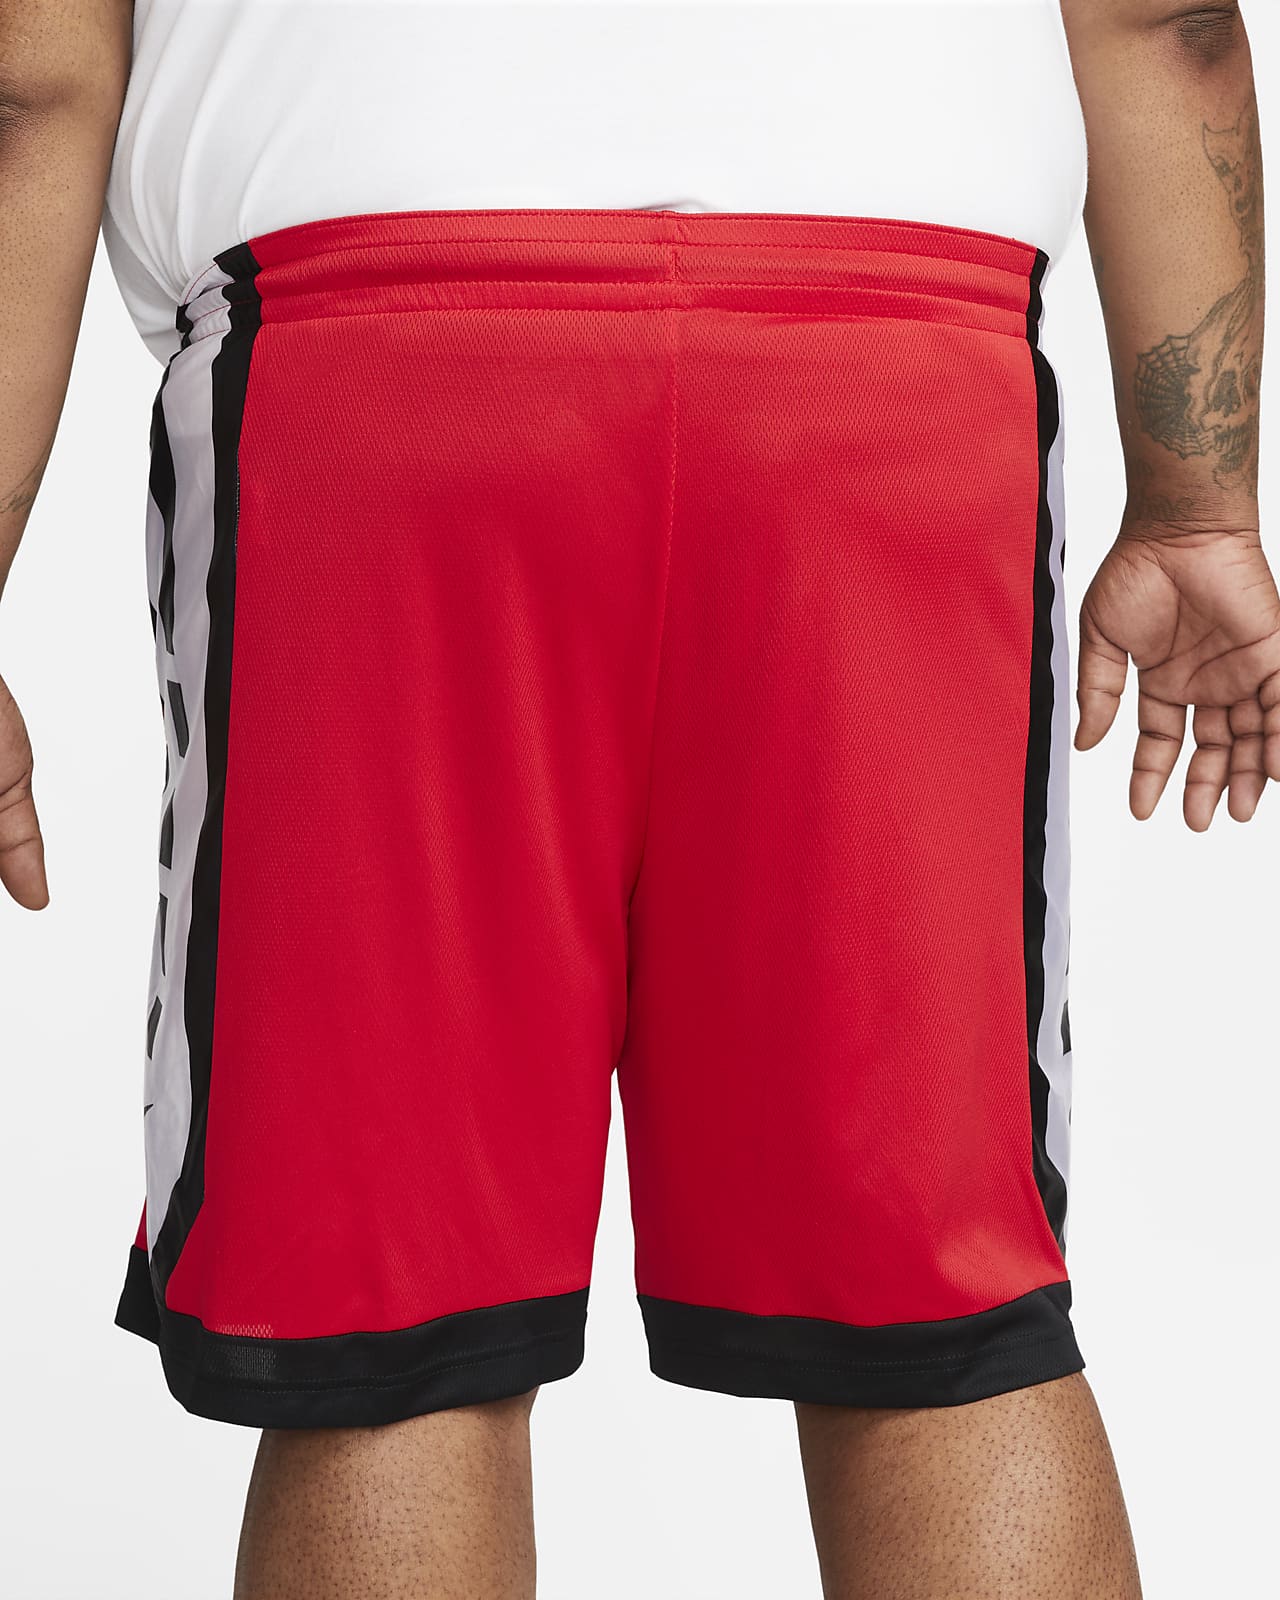 EXCLUSIVE BASKETBALL SHORTS (EXCLUSIVE BLUE) – Exclusive Delivery Co.